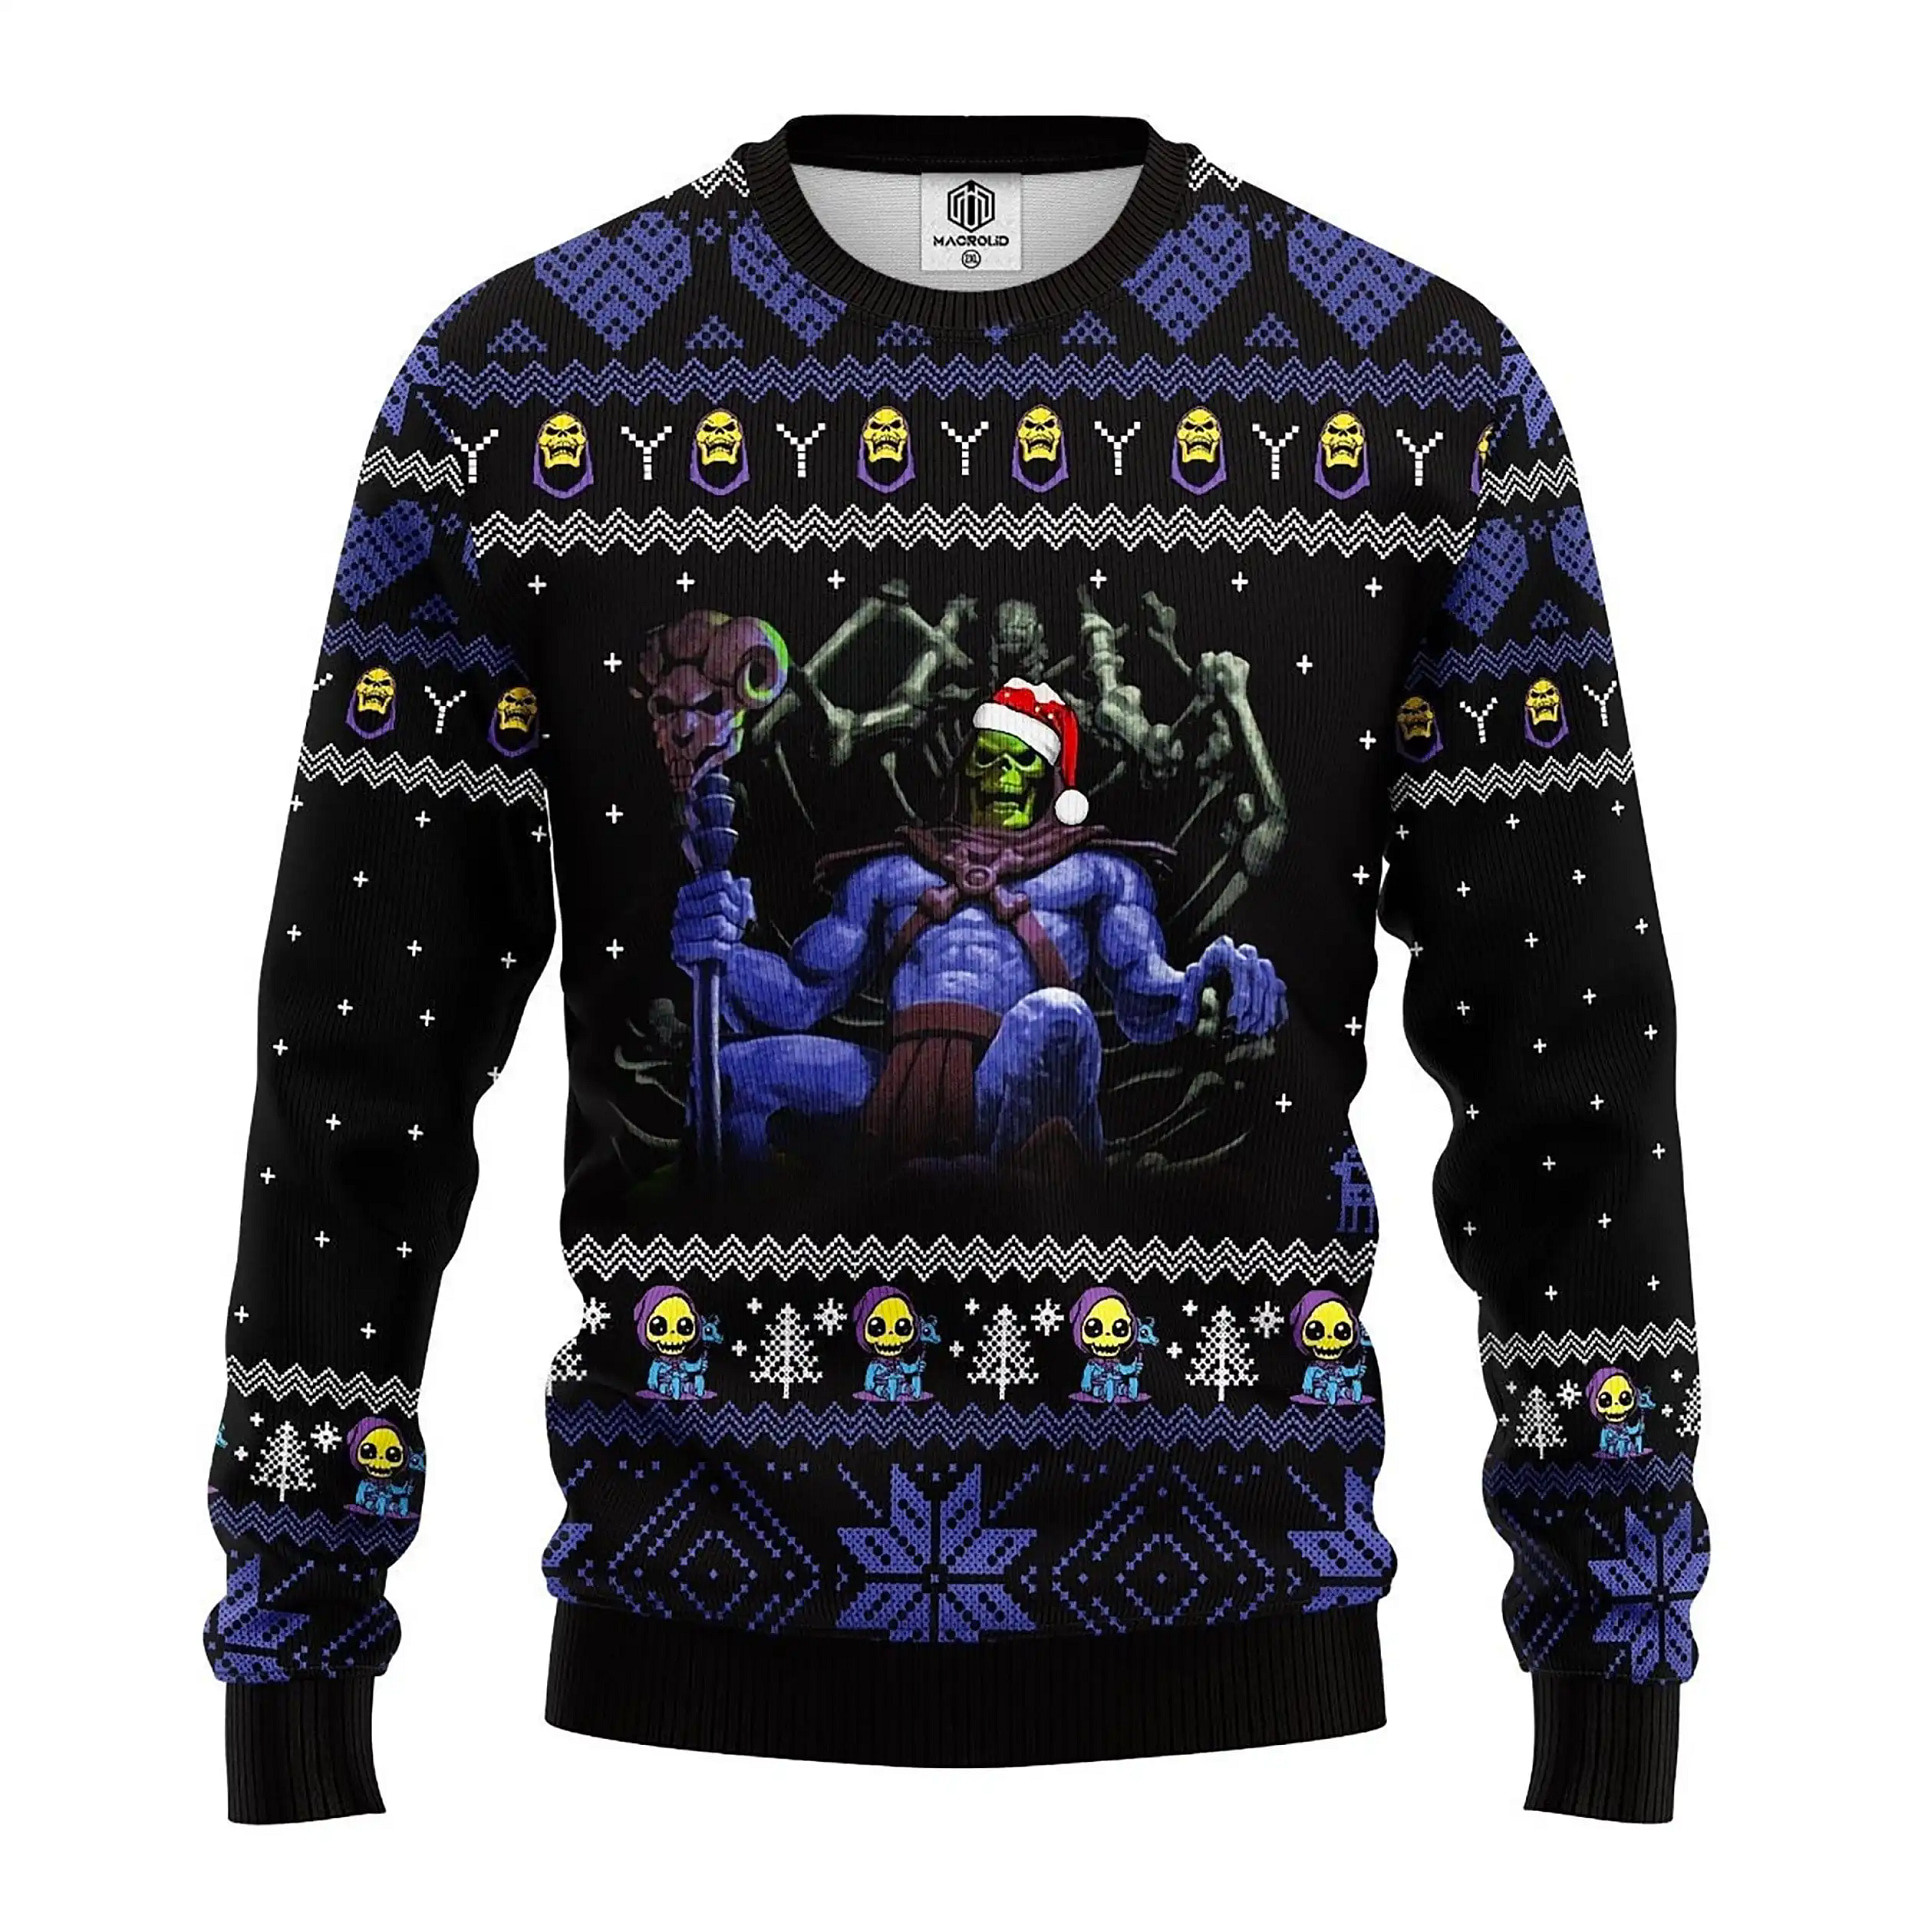 Skeletor Knitted Xmas Best Holiday Gifts Ugly Sweater